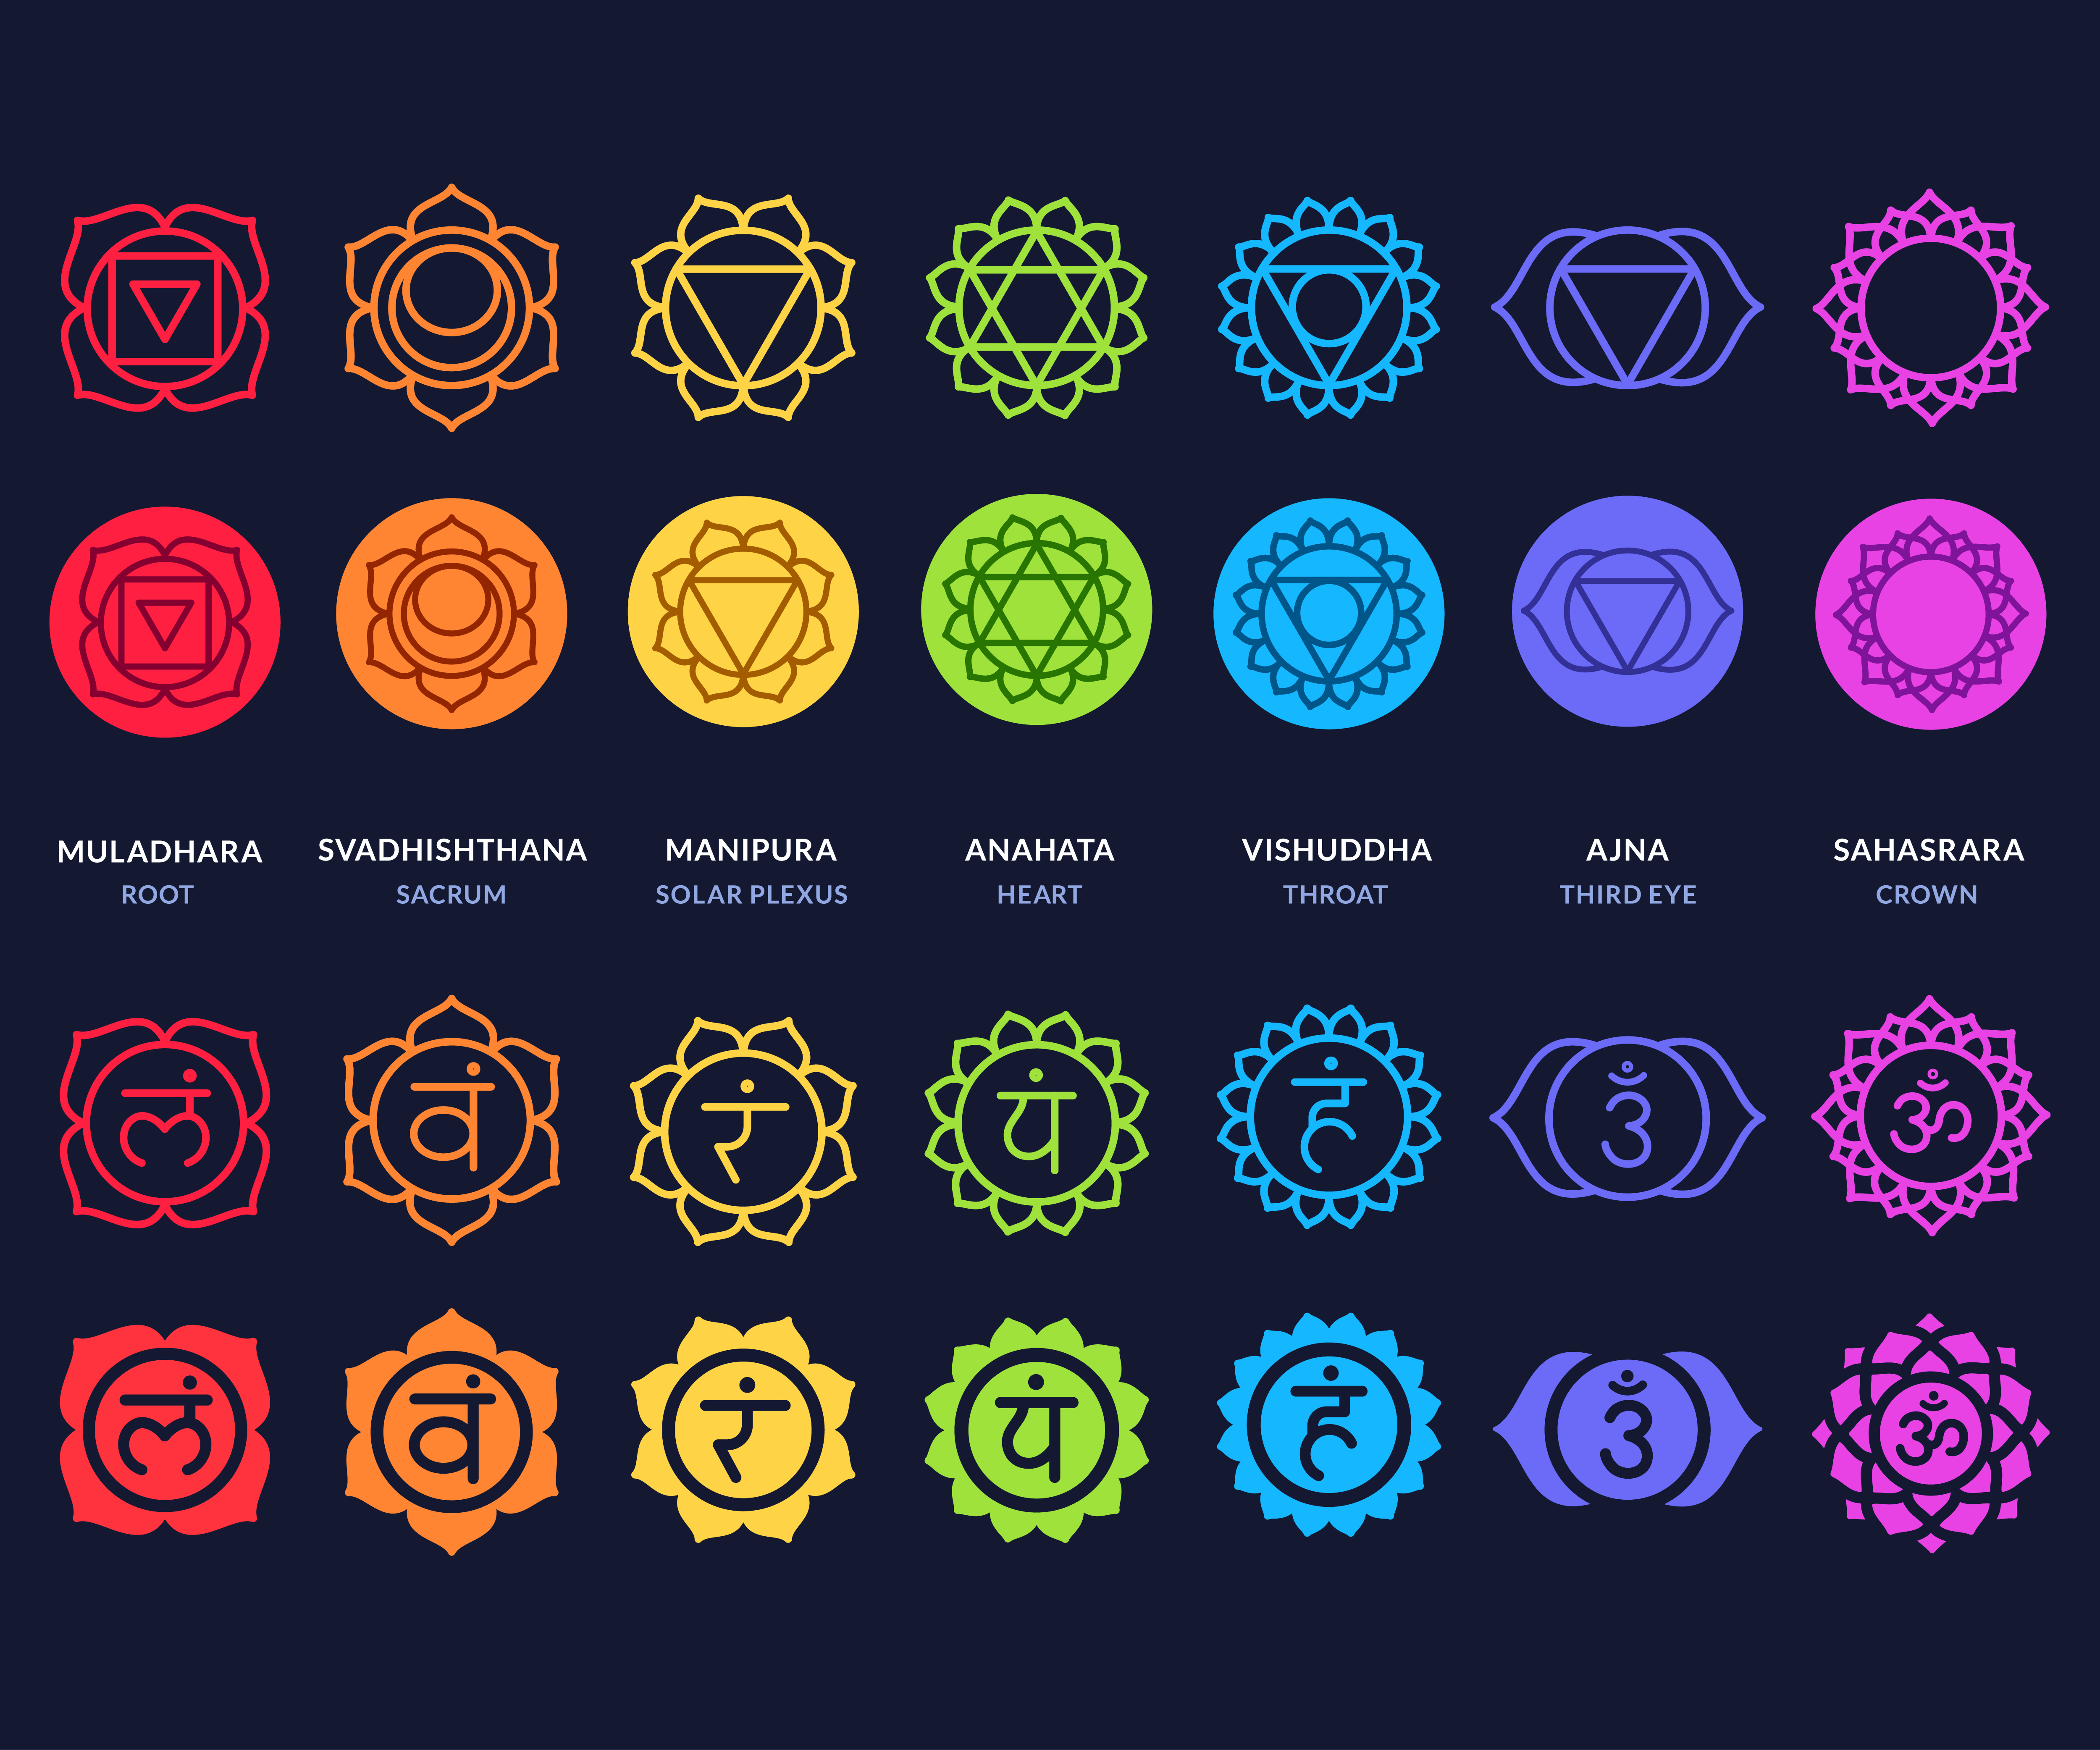 The Science Behind Your Chakras: What Are Chakras and How Many Are